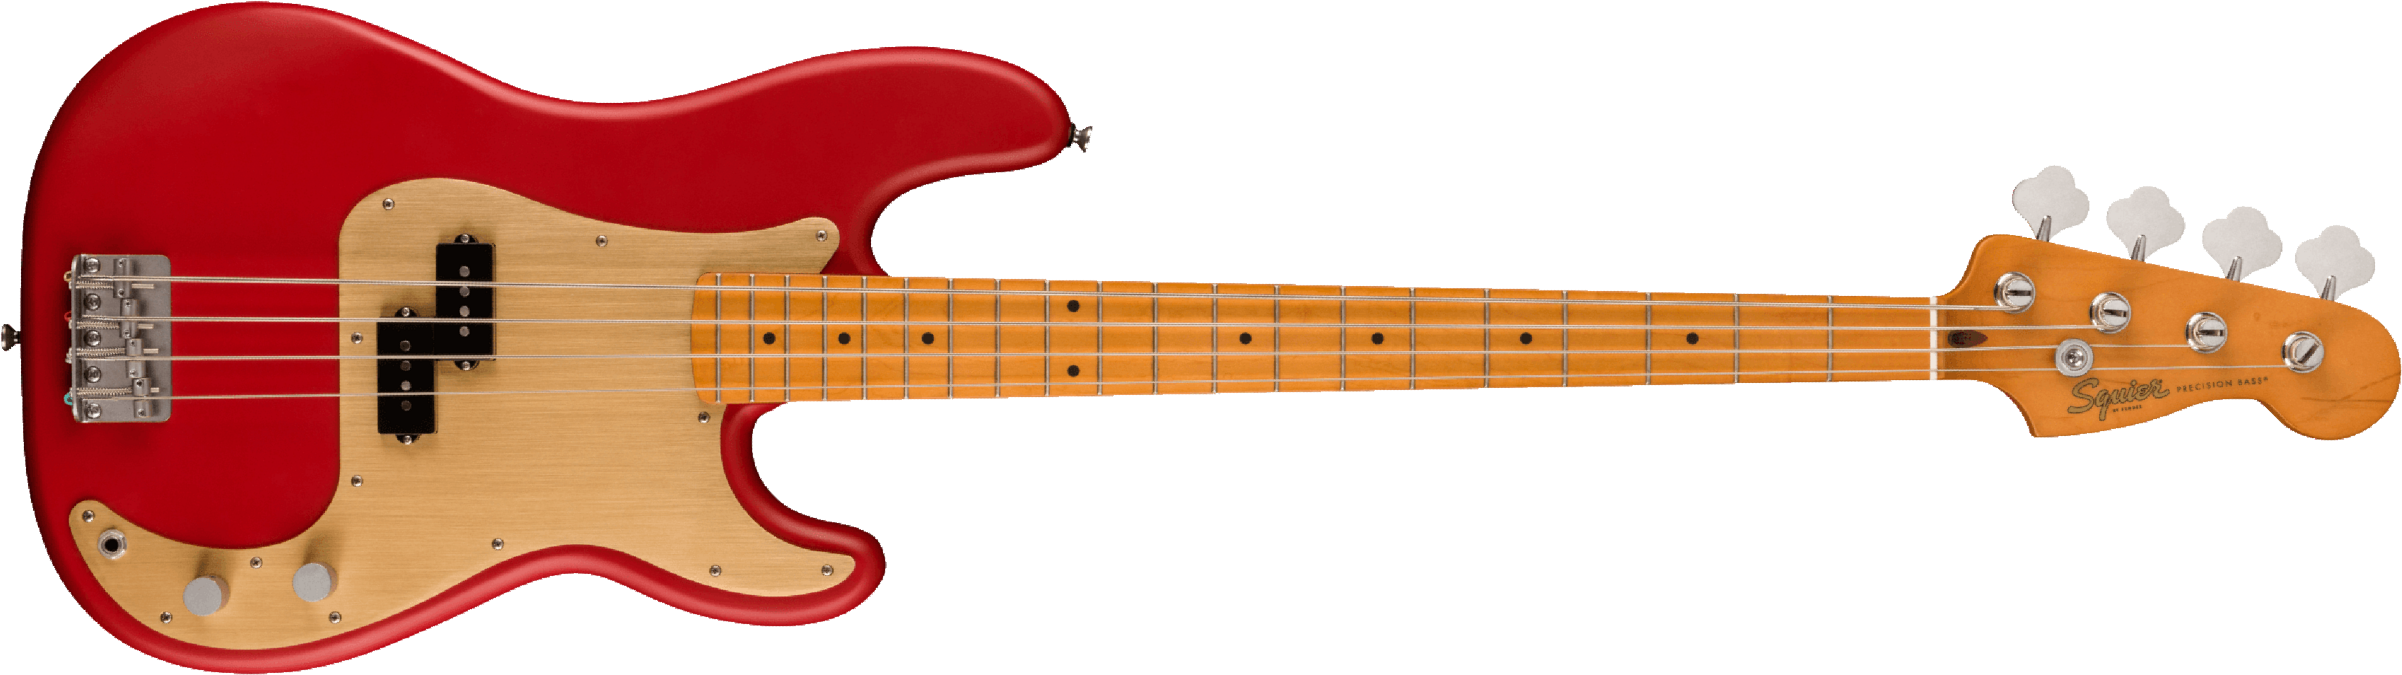 Squier Precision Bass 40th Anniversary Gold Edition Mn - Satin Dakota Red - Solid body electric bass - Main picture